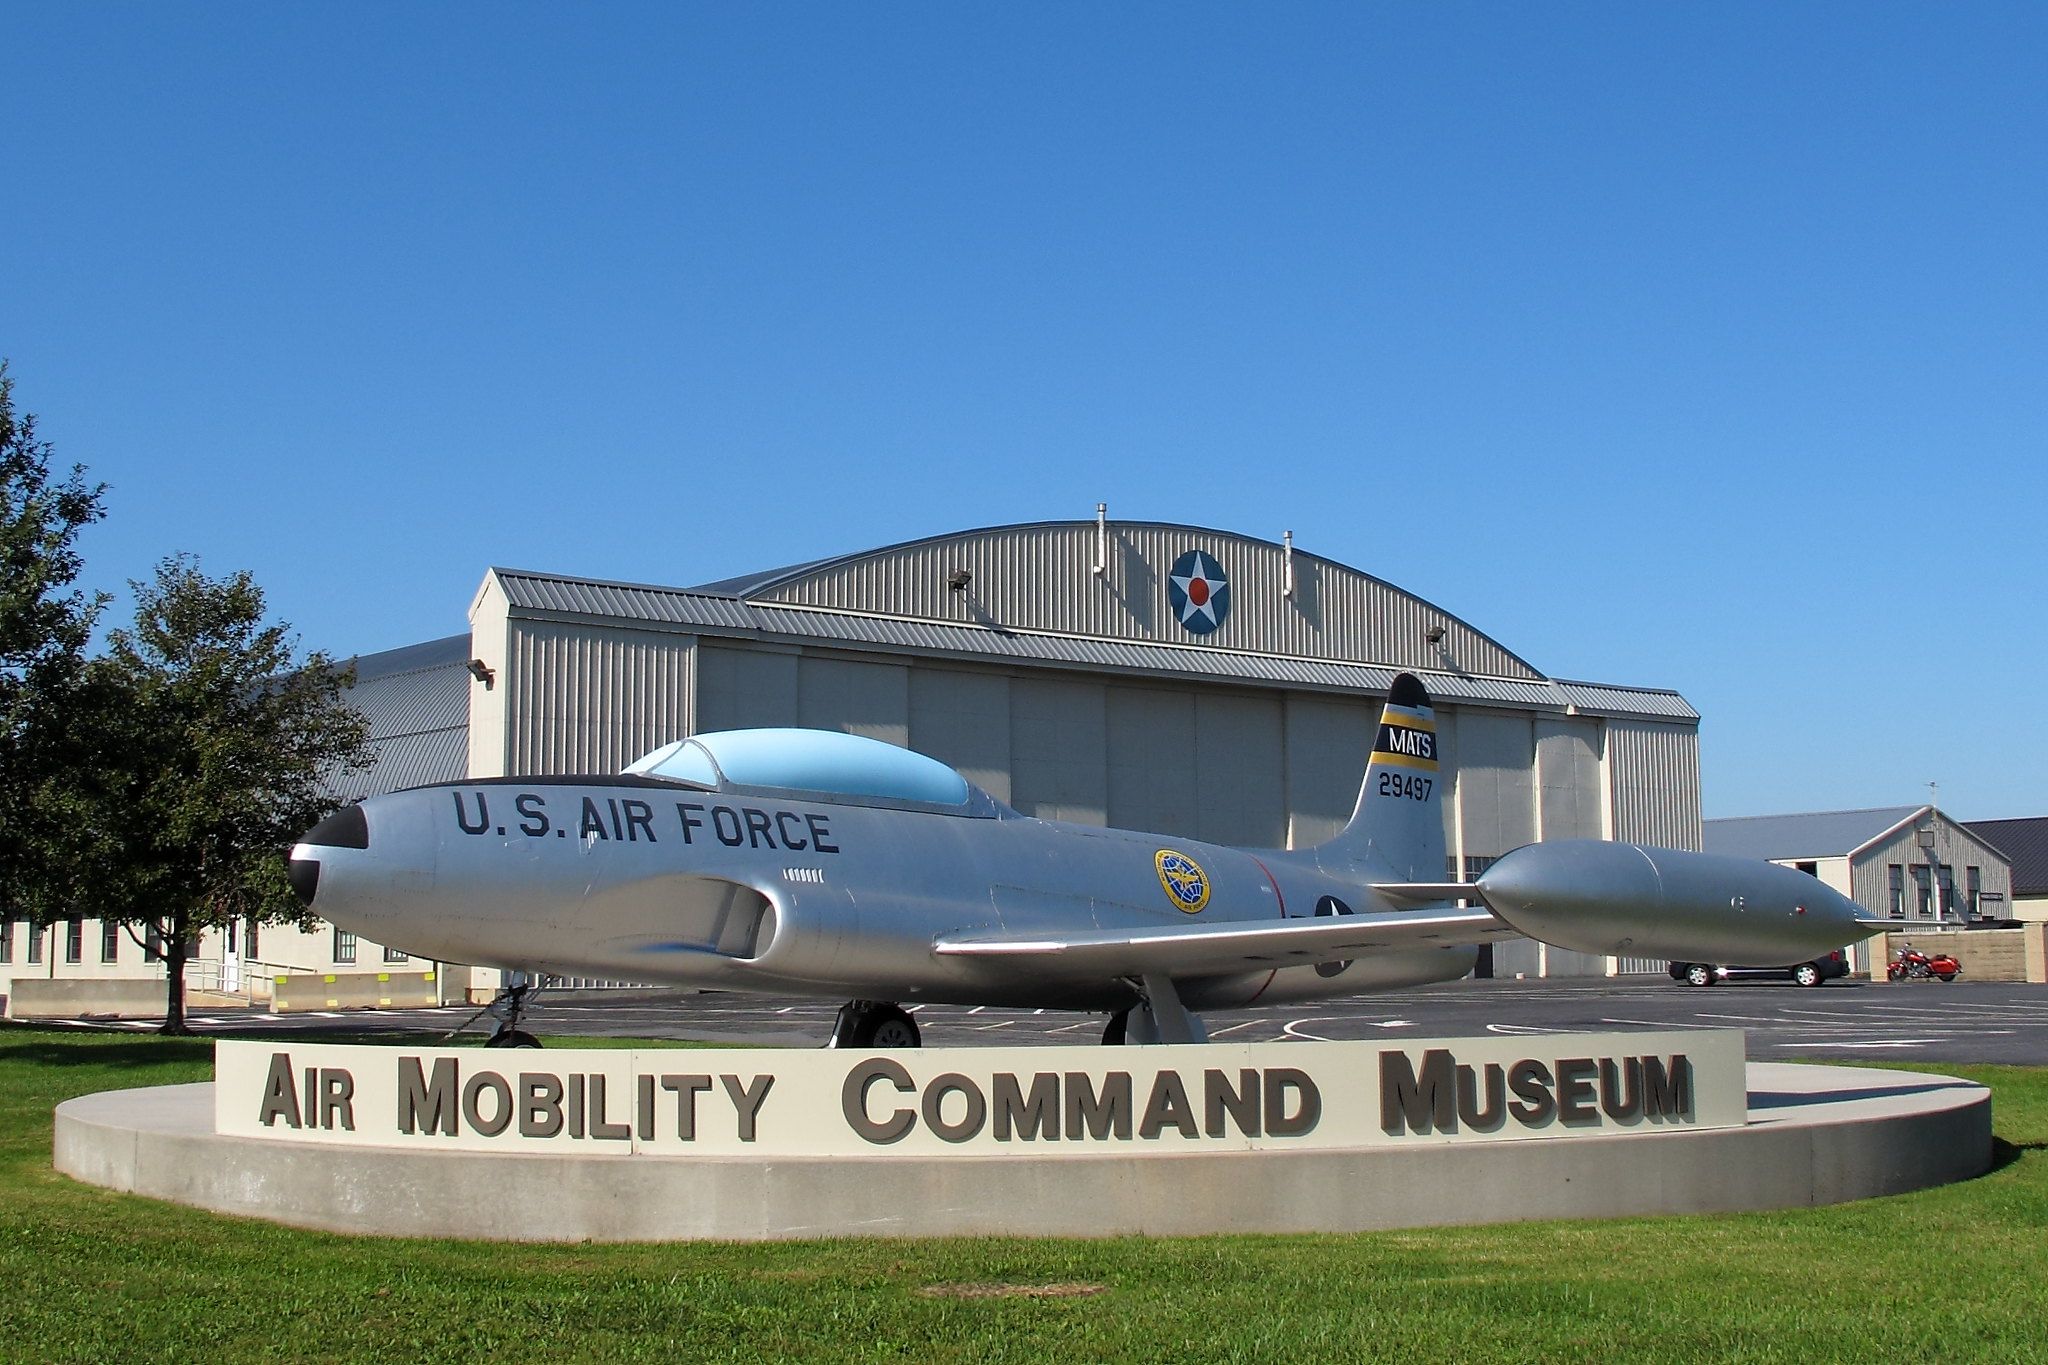 An aircraft in the Air Mobility Command Museum in Dover, Delaware